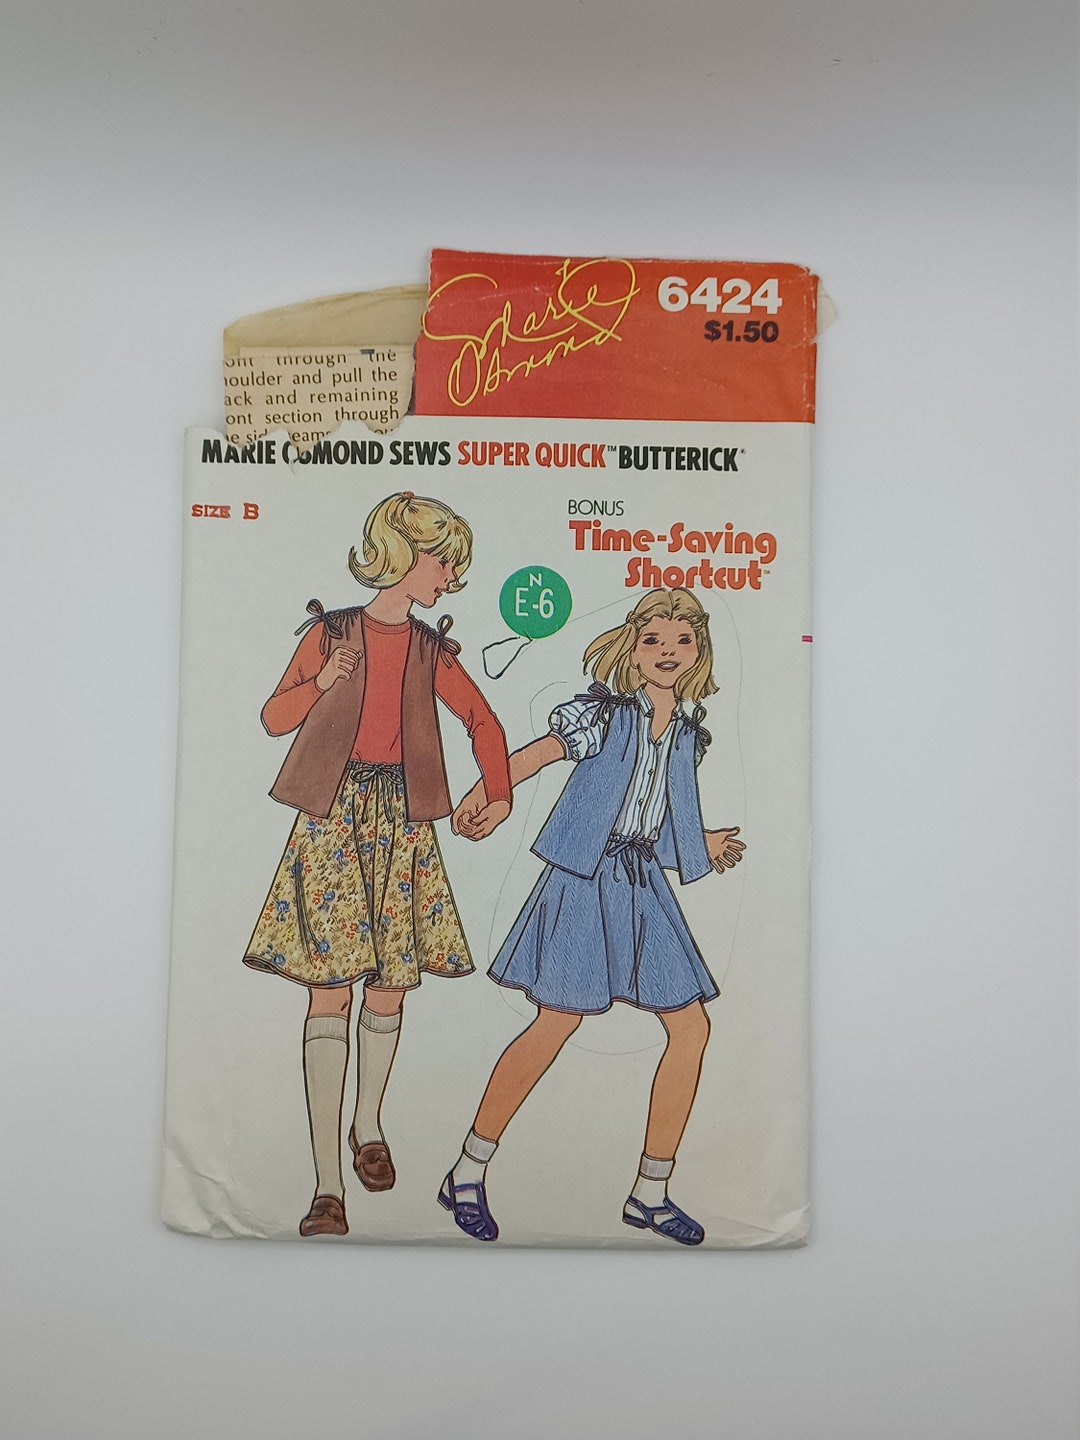 1980 S Marie Osmond Sew Super Quick Butterick 6424 Vintage Girl S Skirt And Vest Cut Size B Etsy